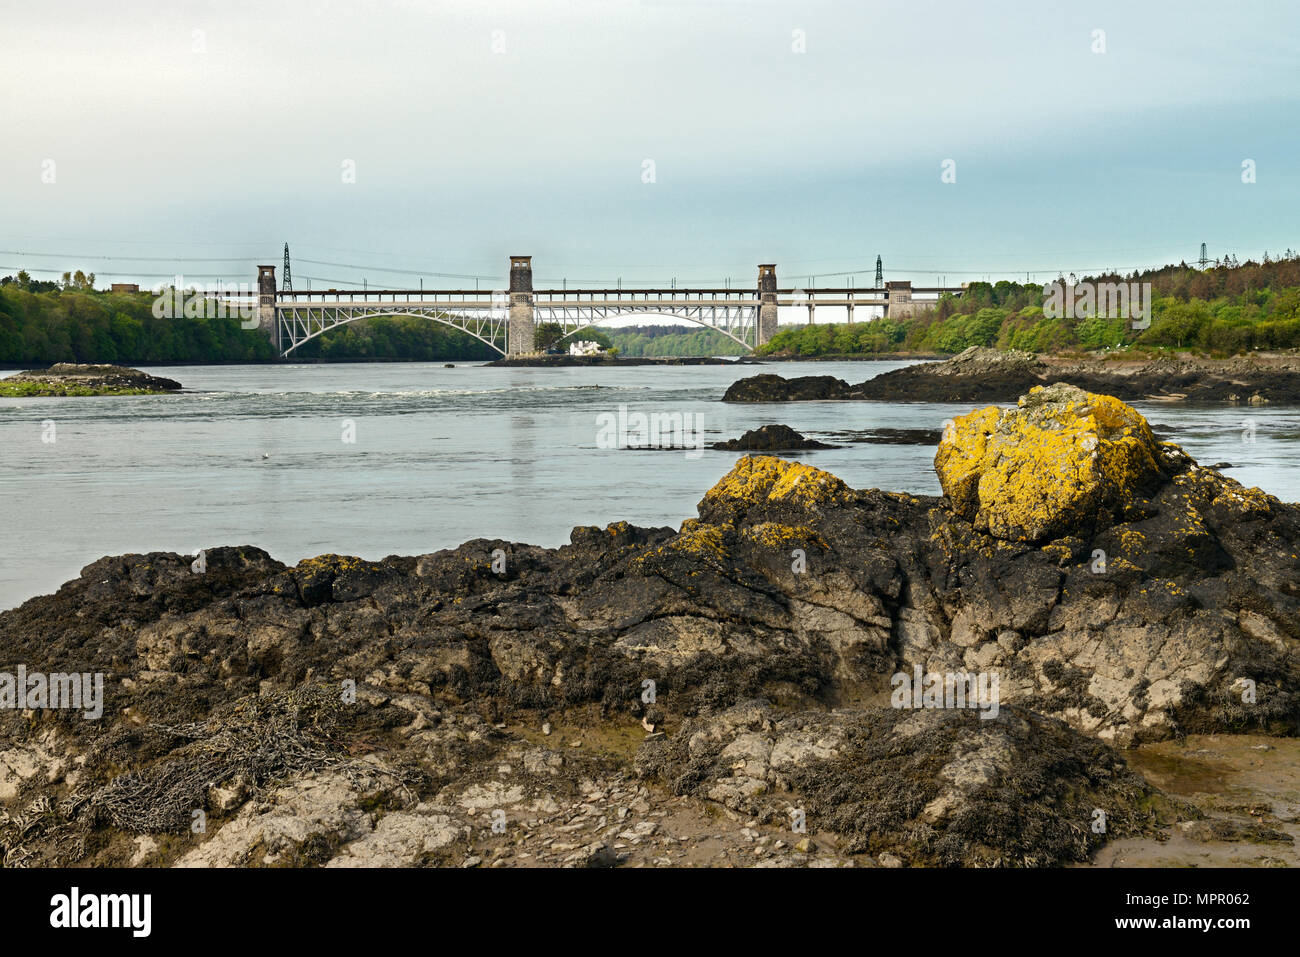 Menai Strait is a narrow stretch of sea water that separates the island of Anglesey from mainland Wales and here includes the Britannia Bridge. Stock Photo